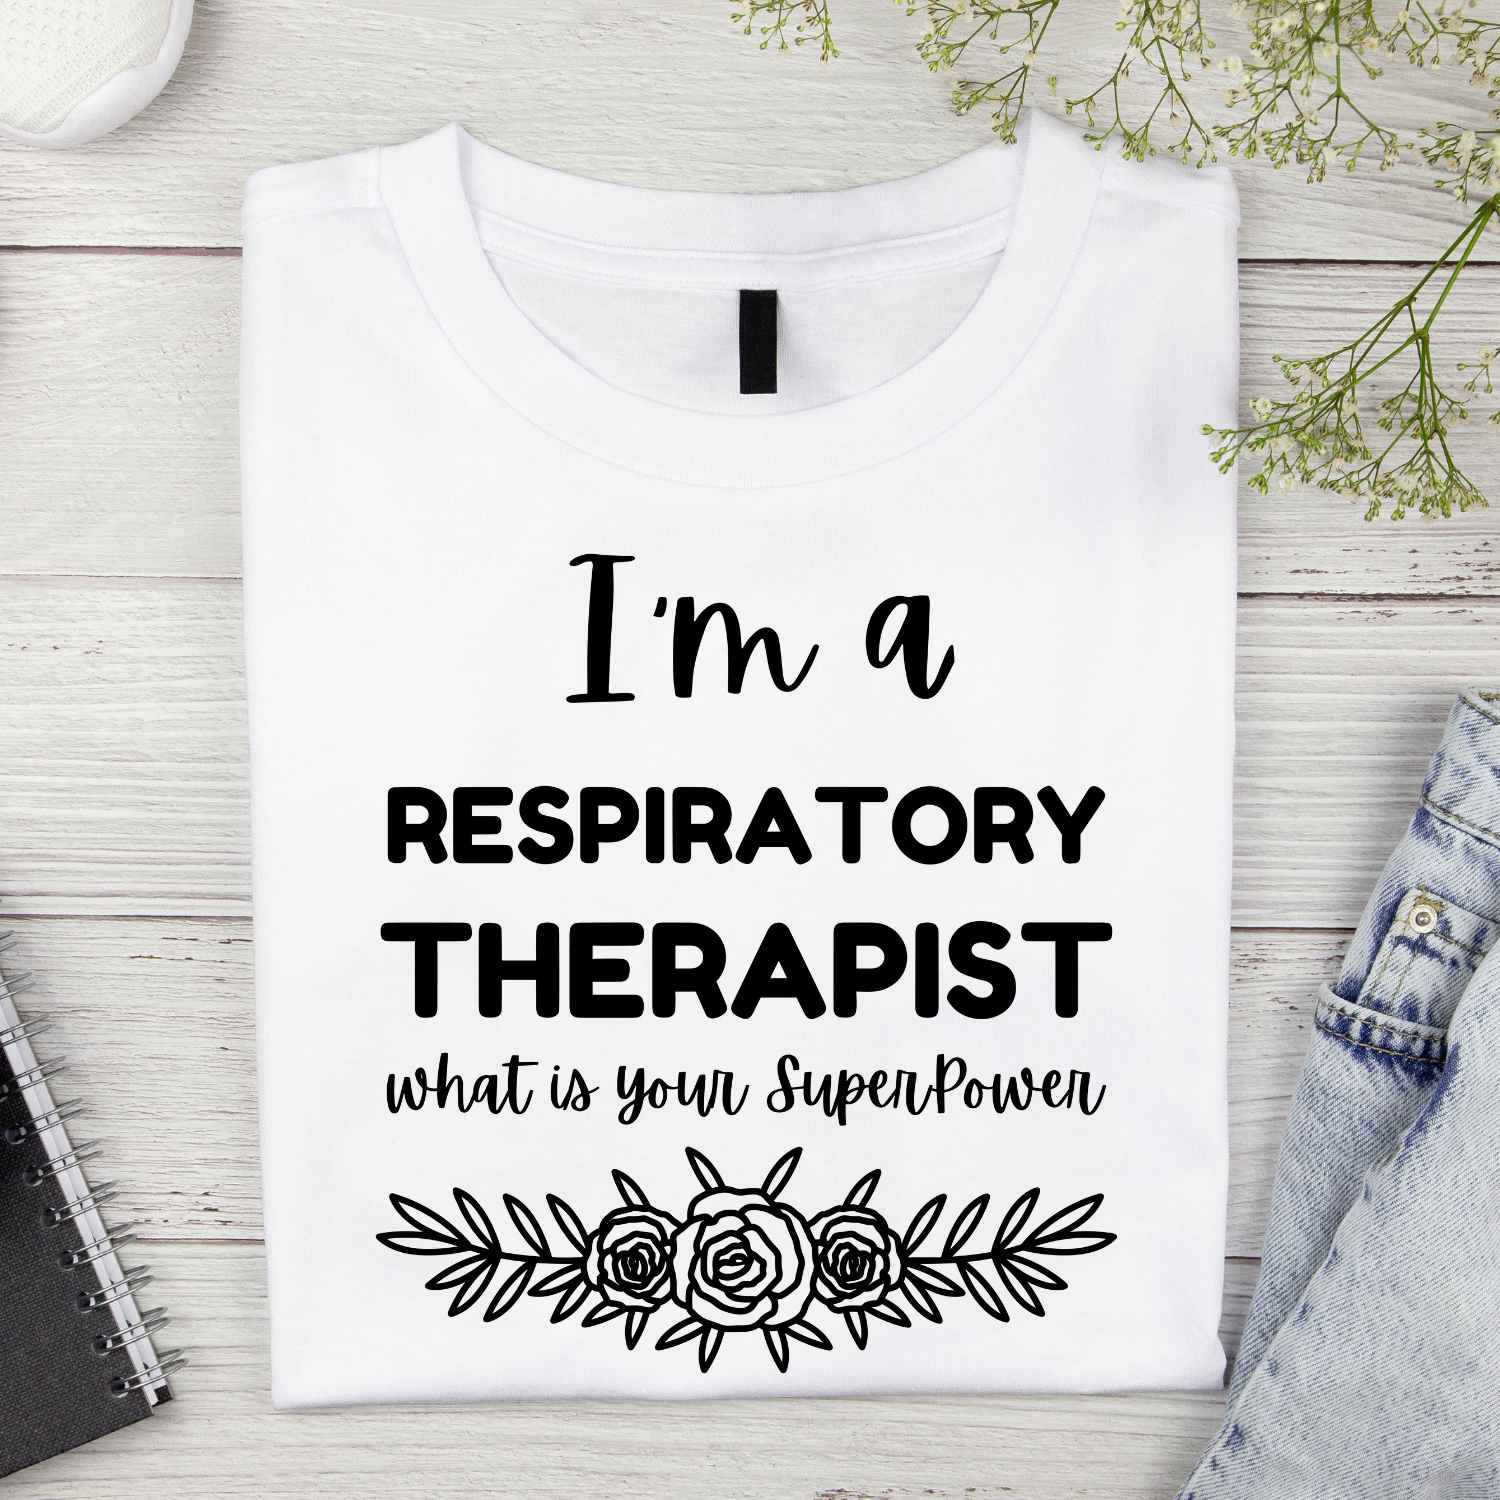 I am a Respiratory Therapist what is your Superpower T-shirt Design